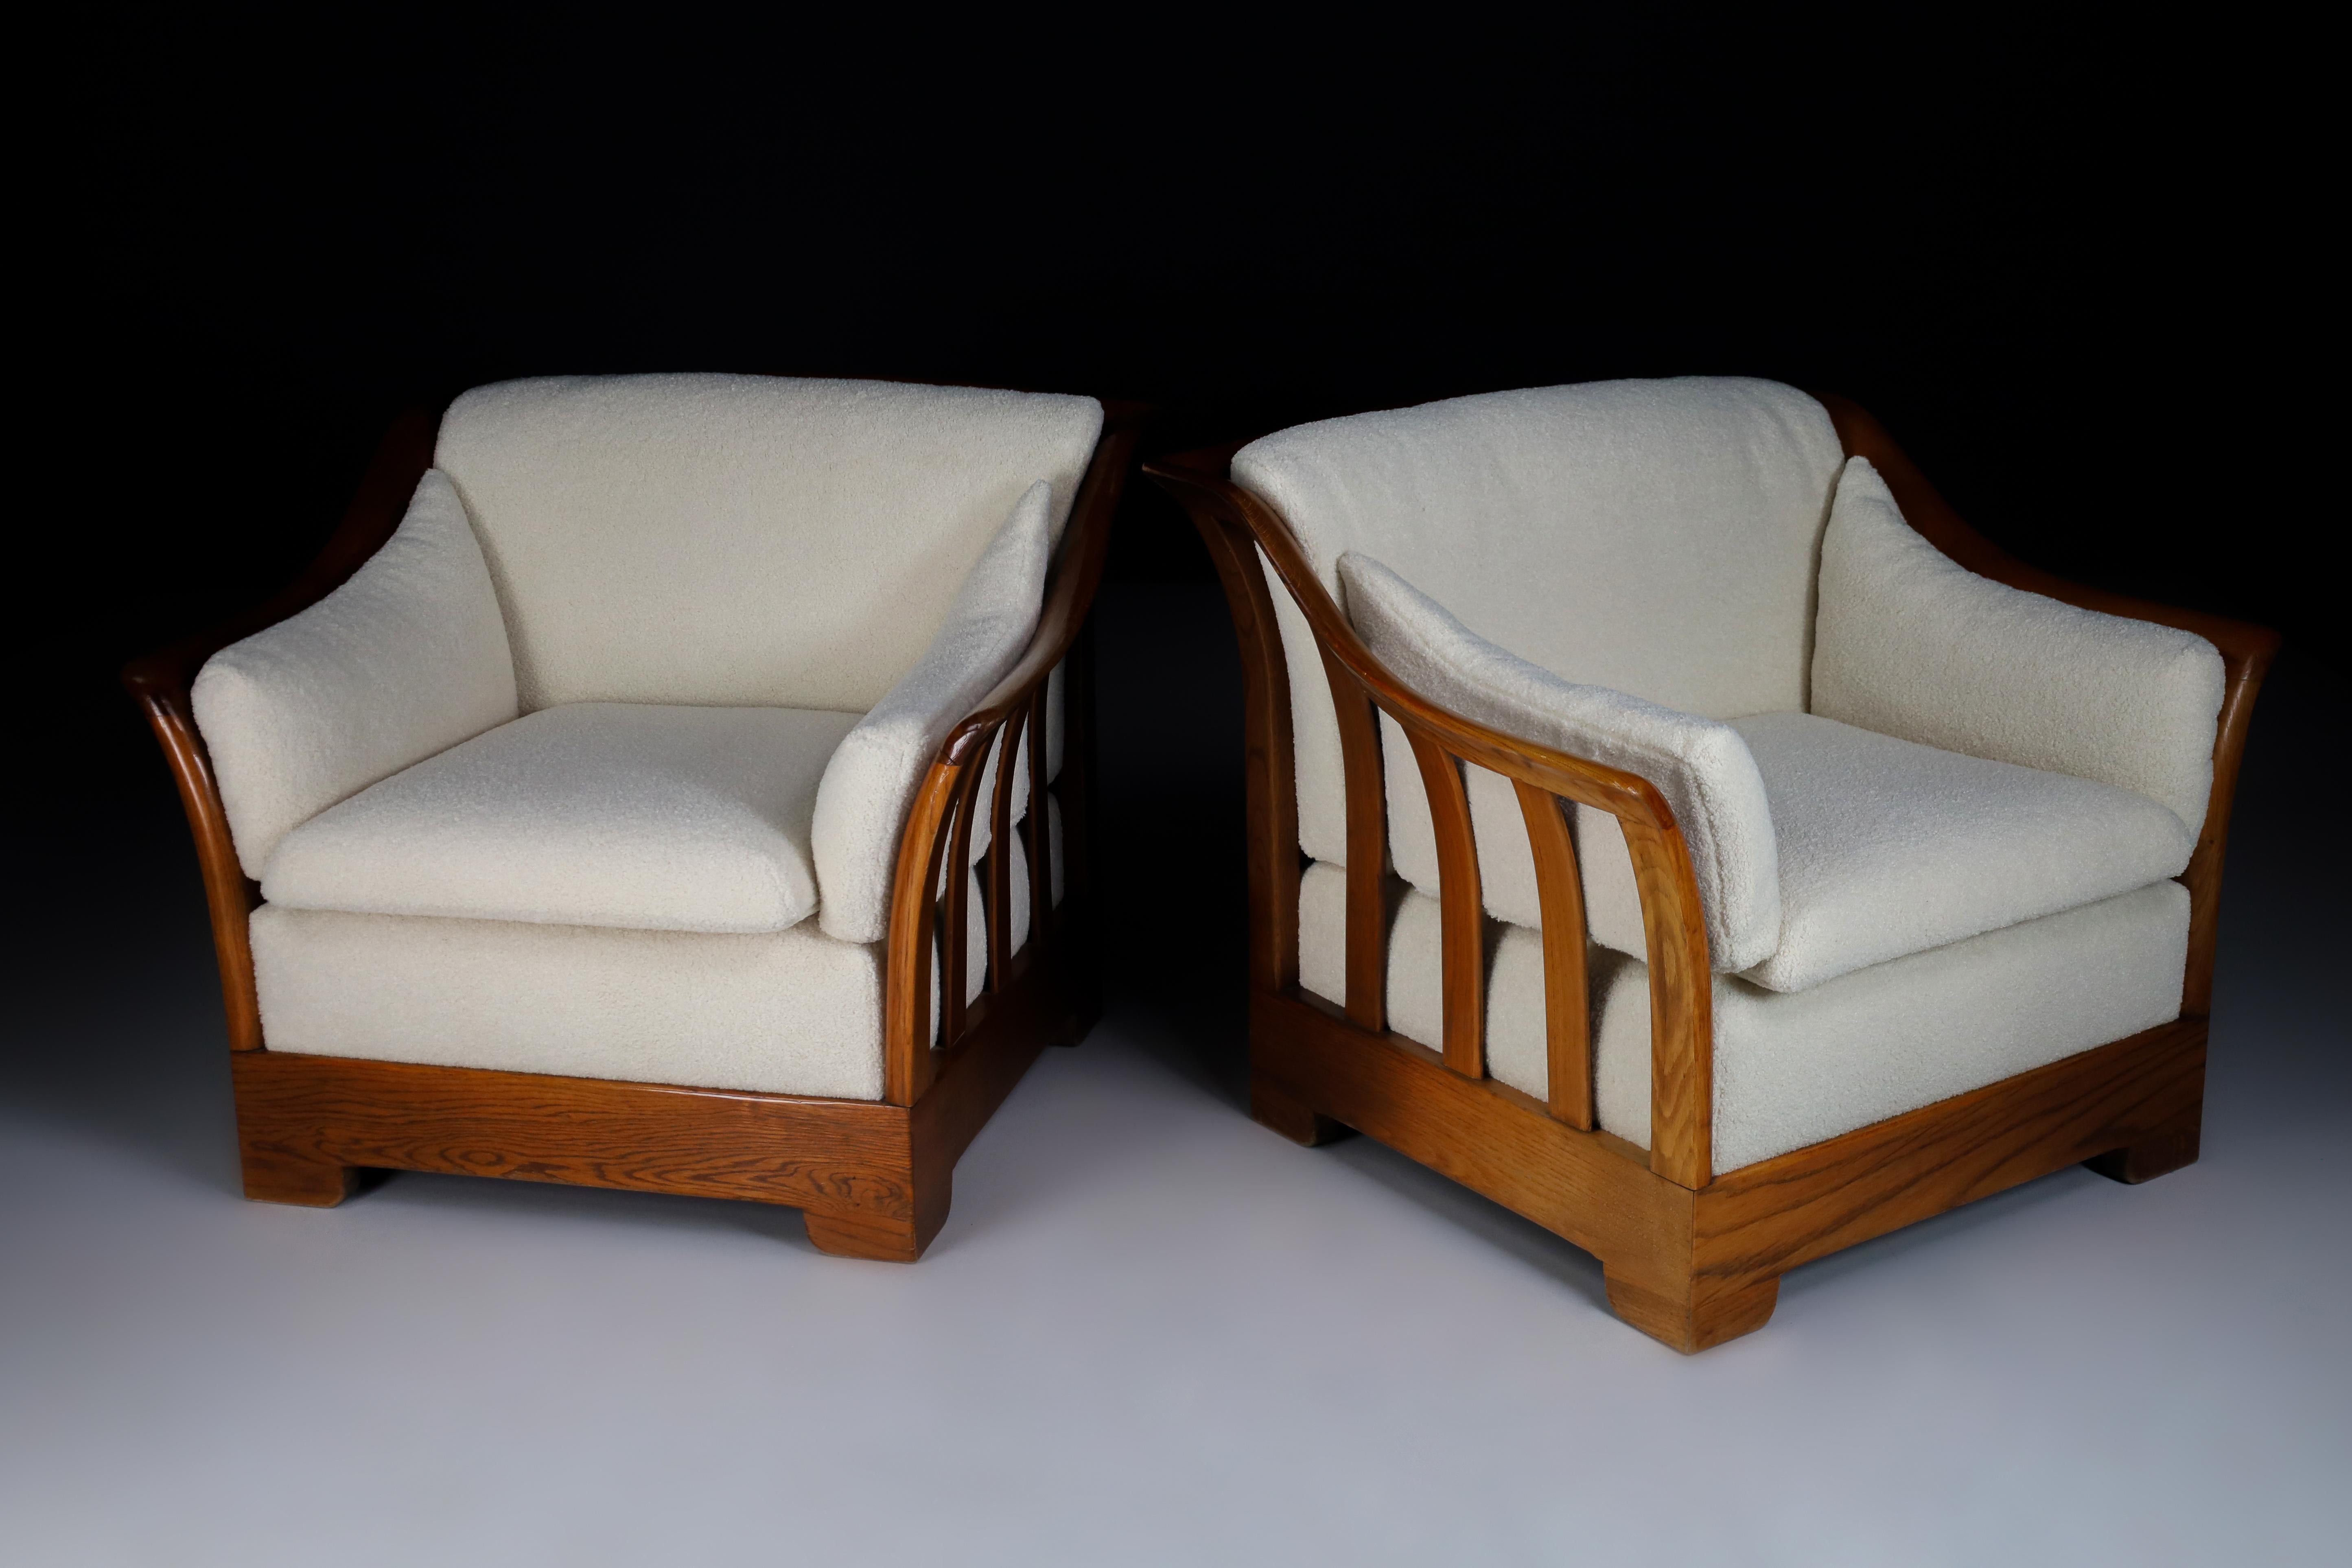 Late 20th Century Lounge Chairs in Ash and Teddy Upholstery by Sapporo for Mobil Girgi, Italy 1970 For Sale